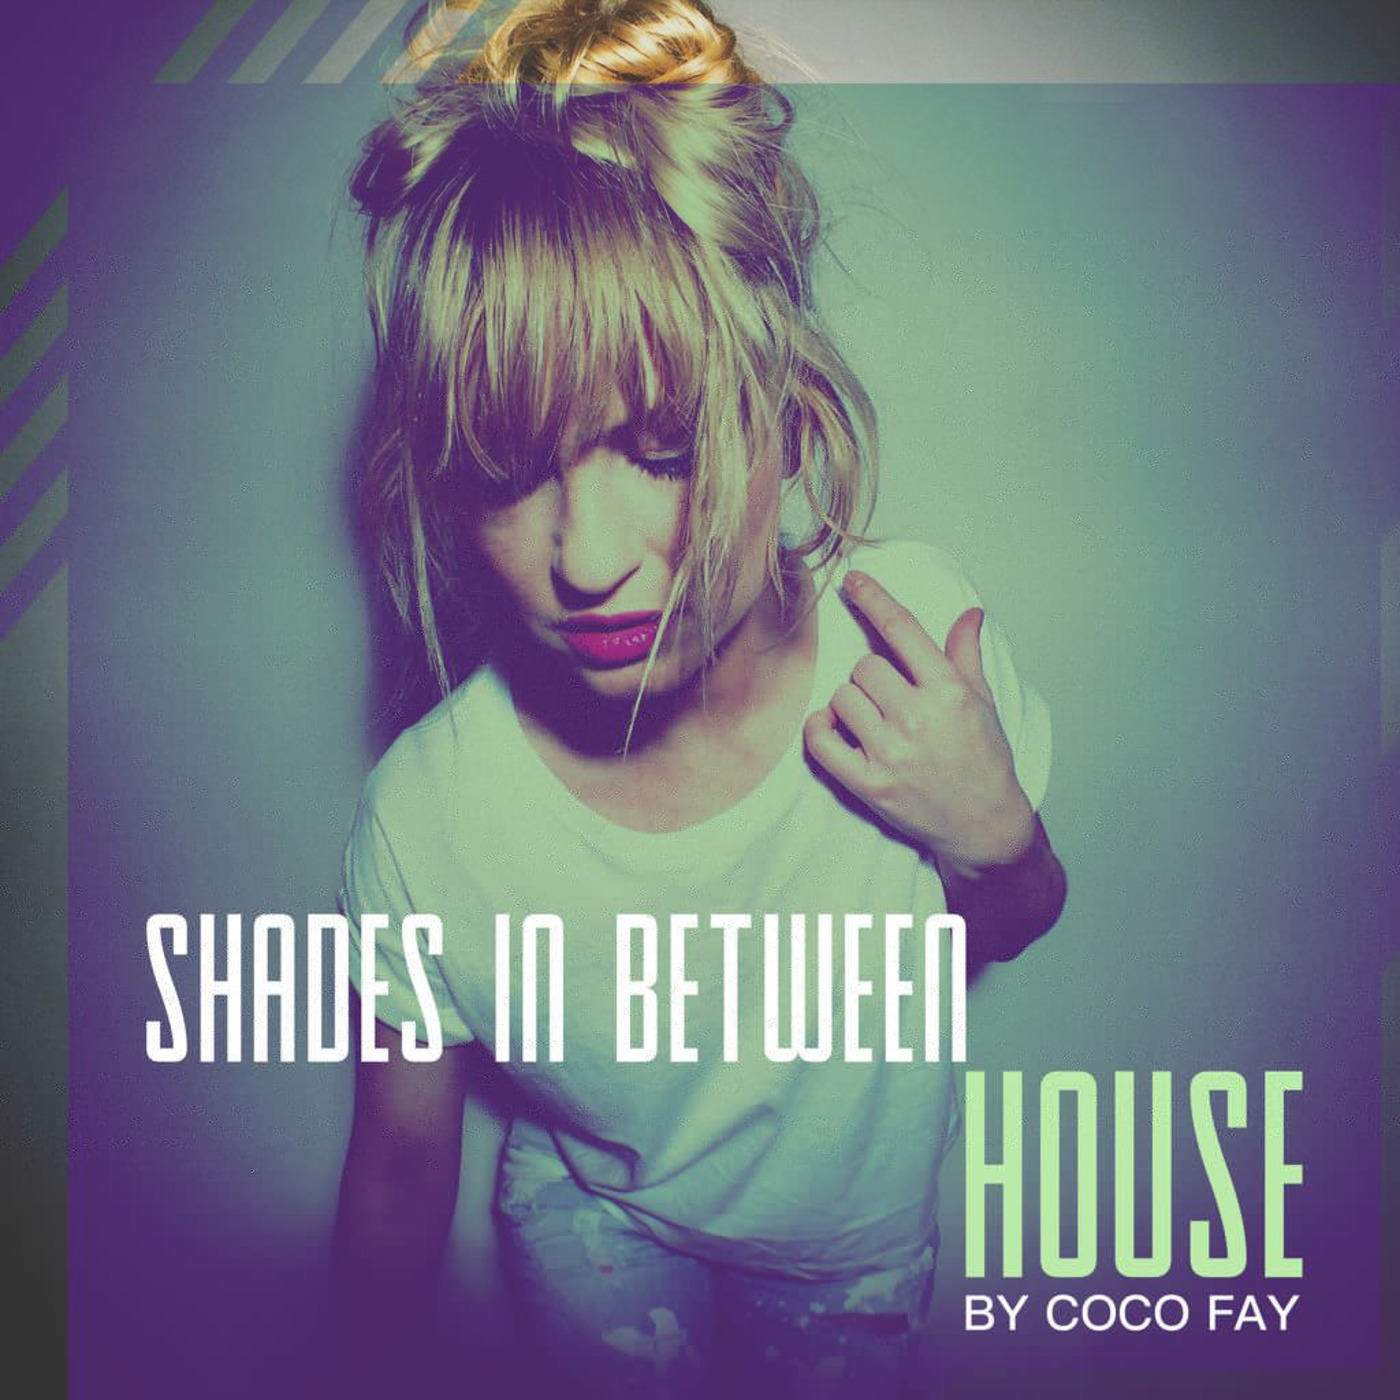 Shades of House #014 by Coco Fay